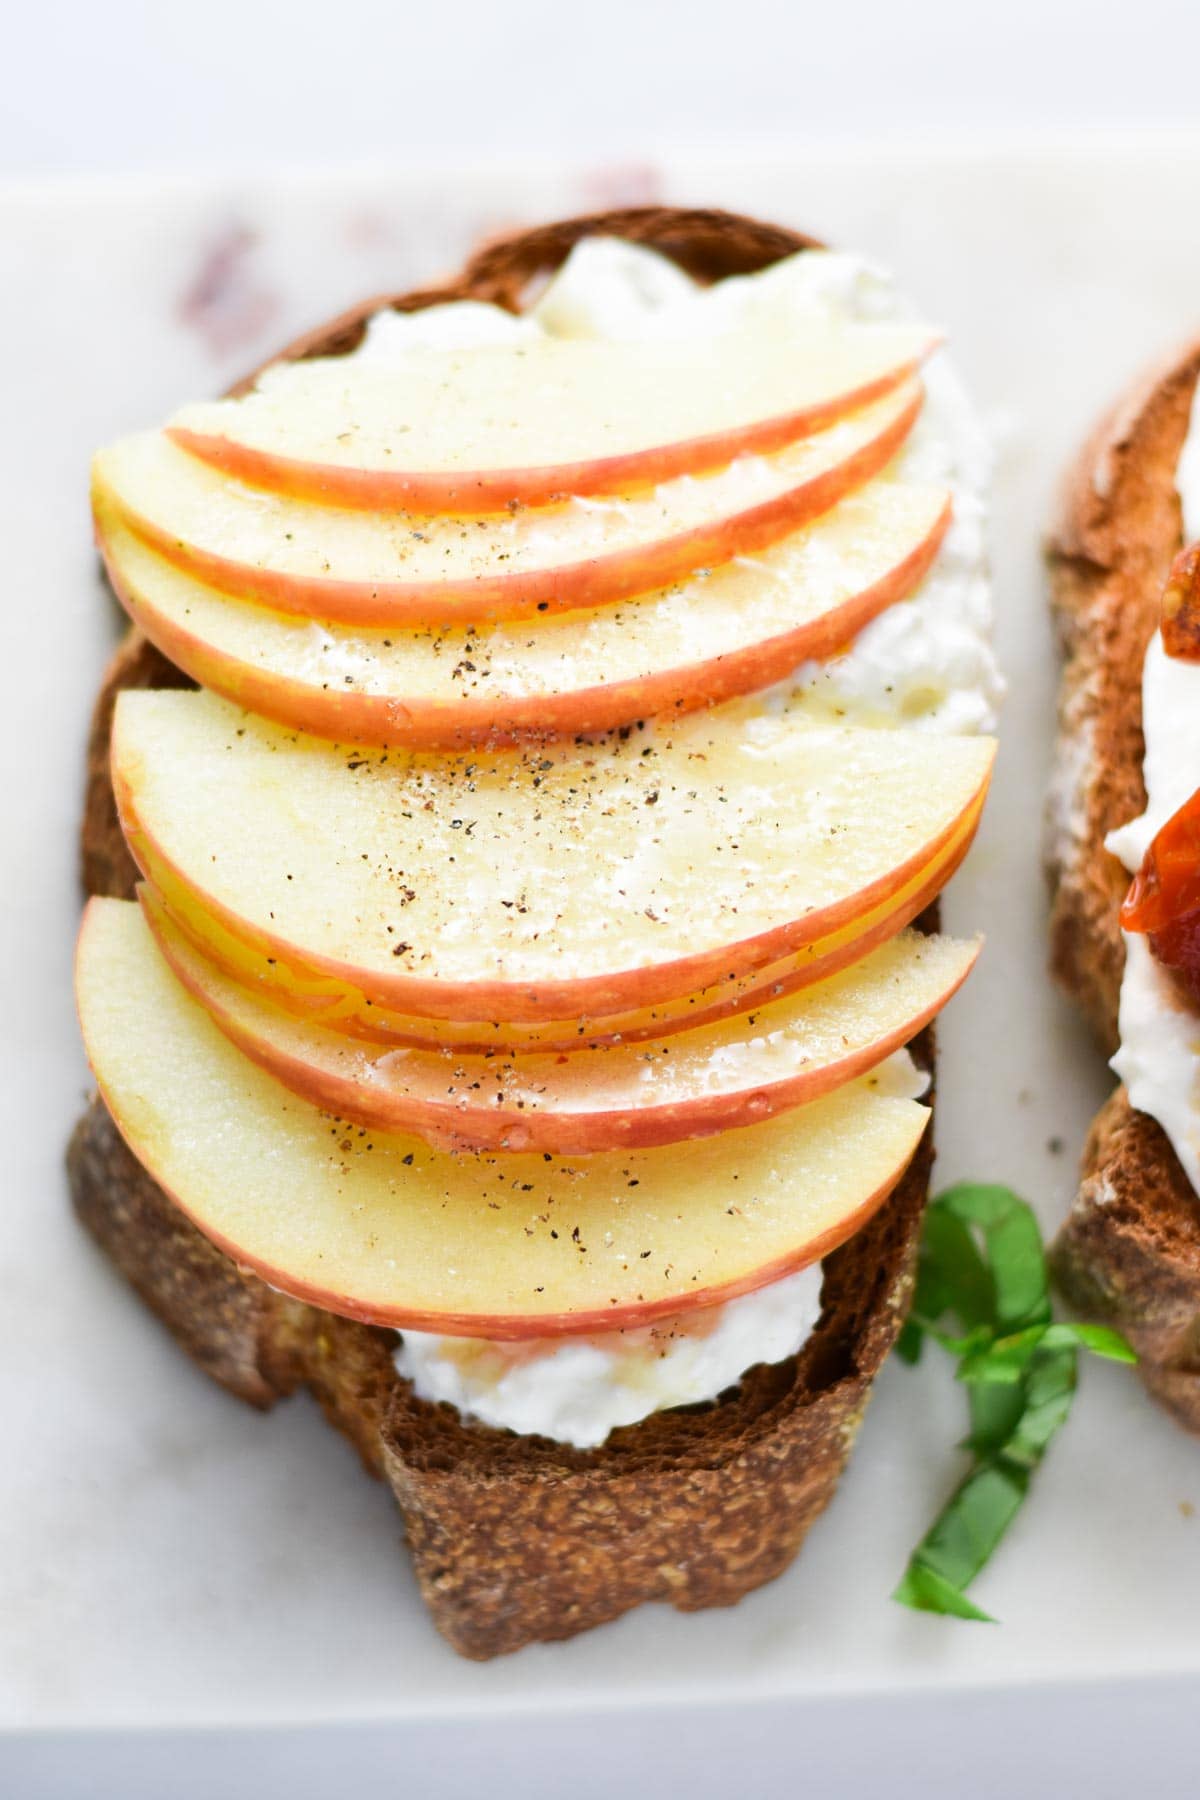 A toast topped with burrata and apples.